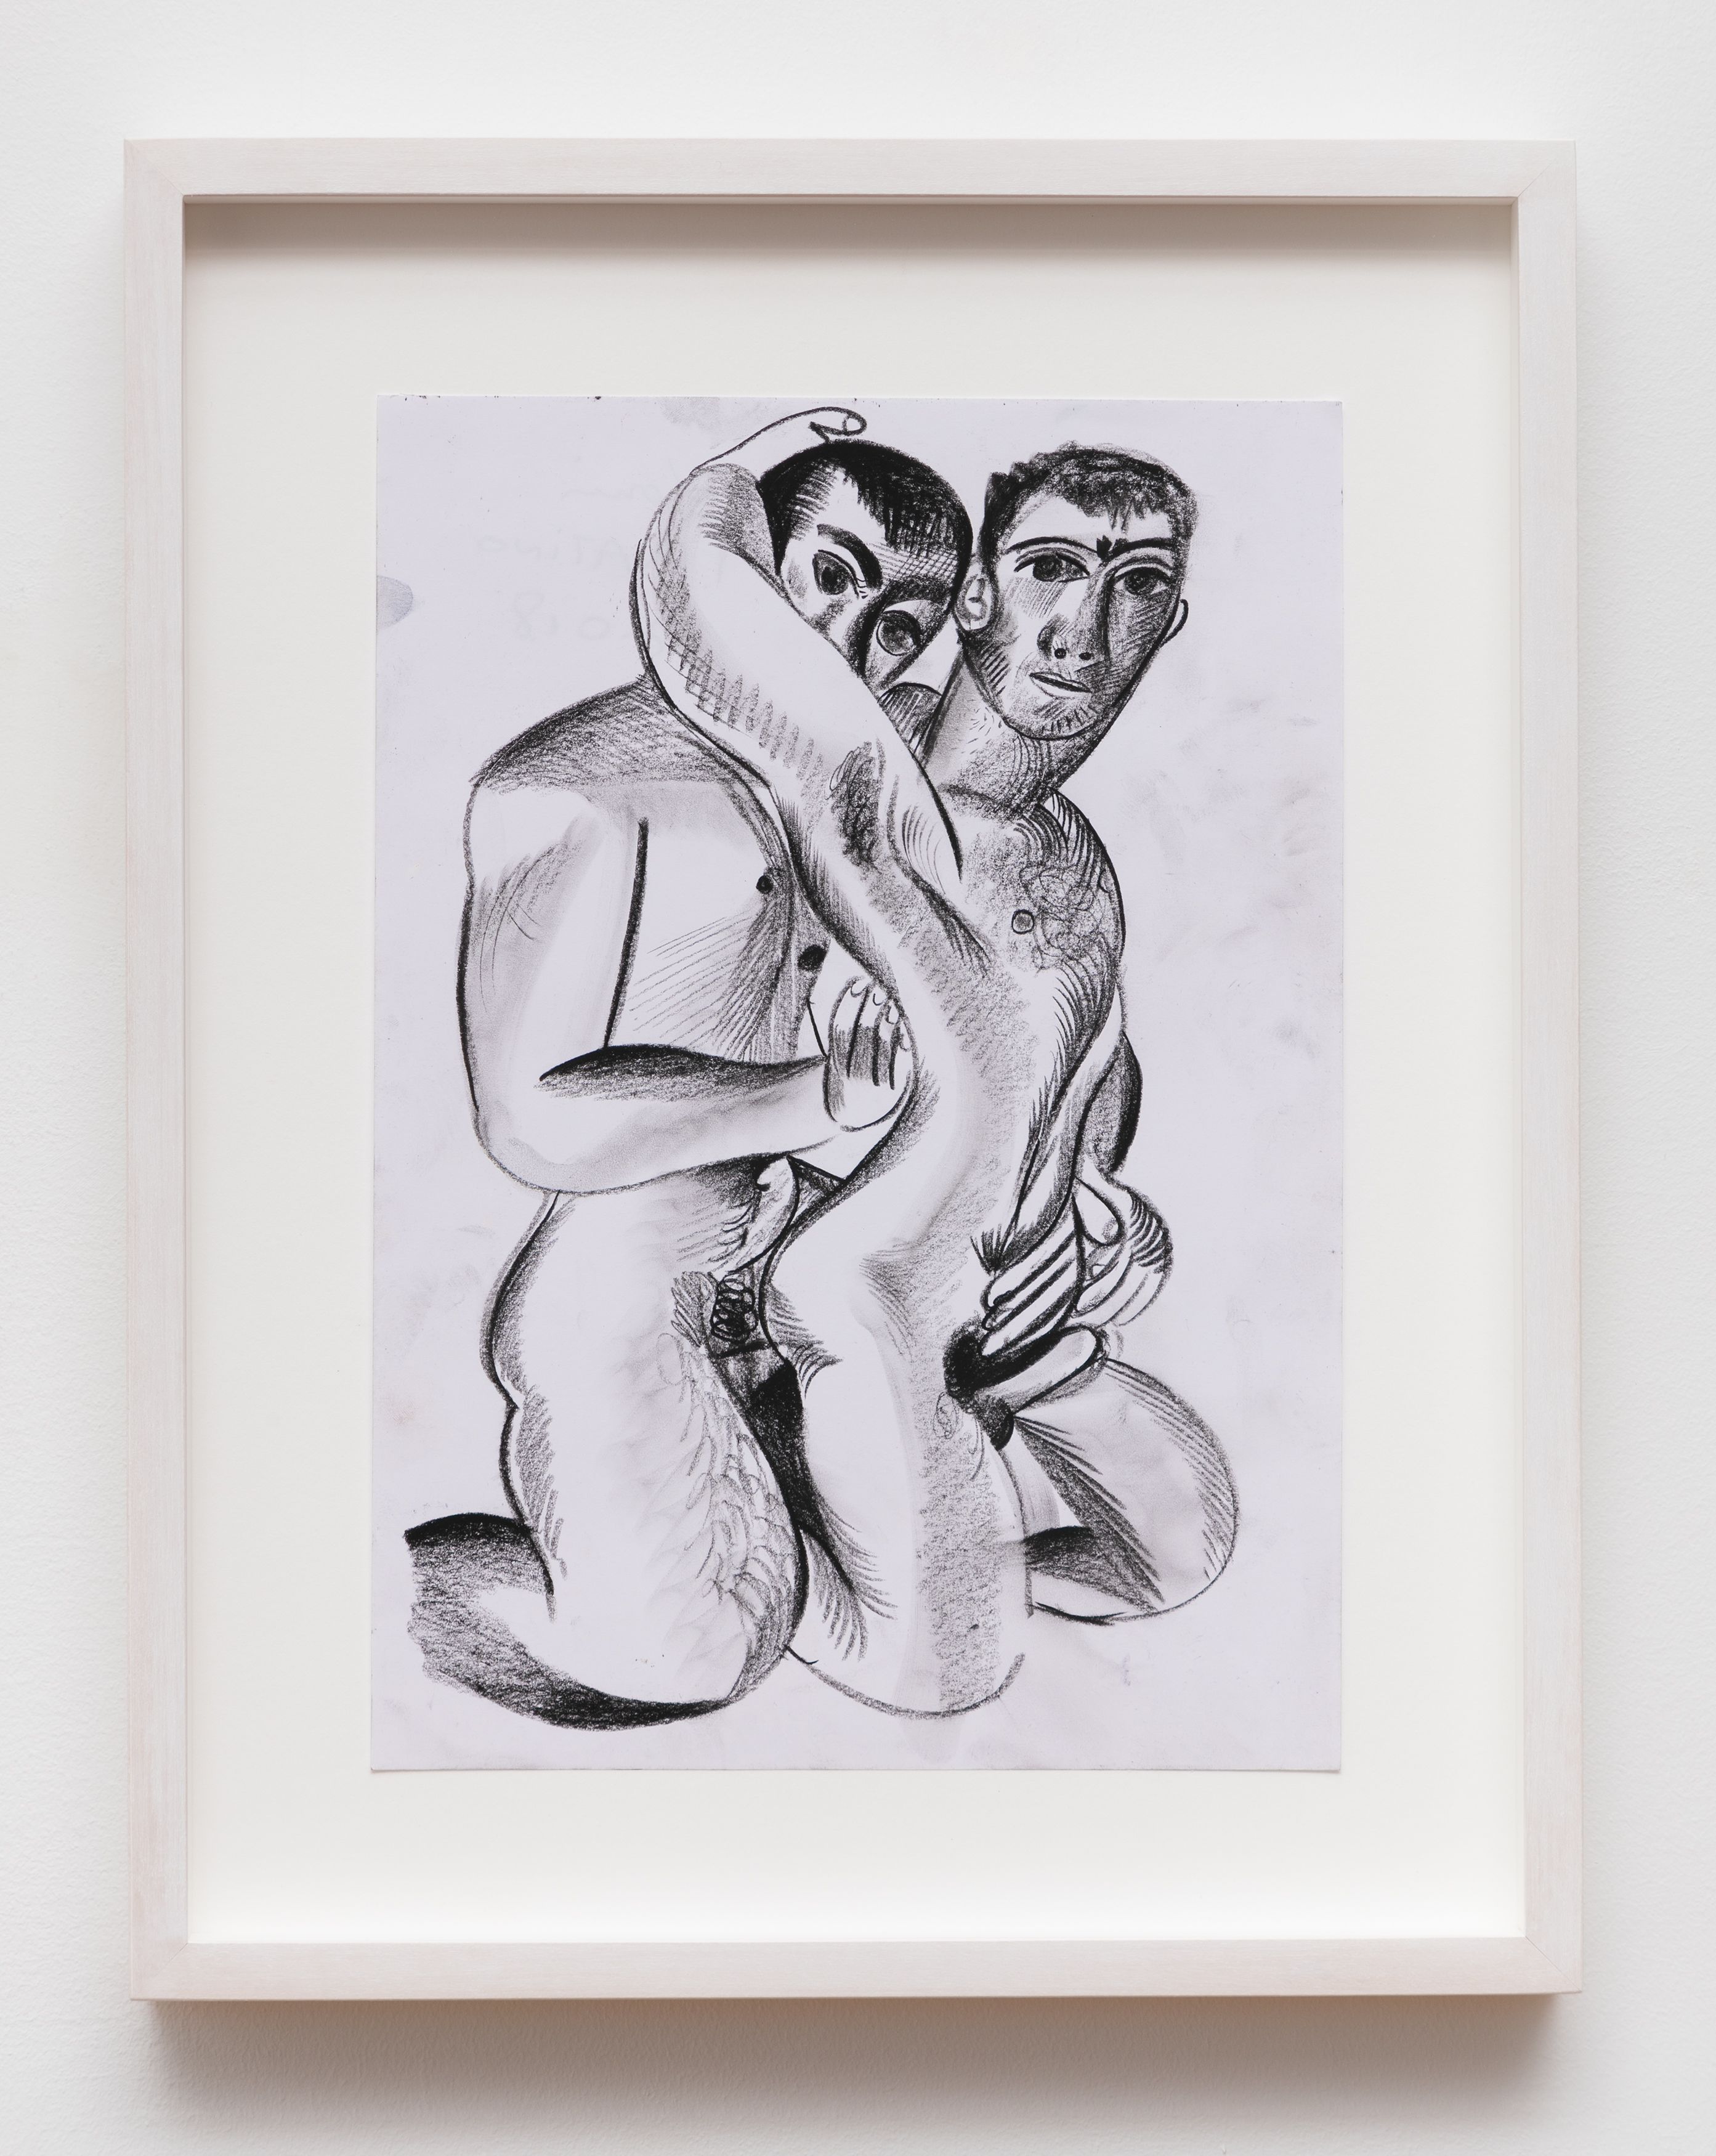 Louis Fratino, Untitled, 2018, pencil on paper, 11 1/2 x 8 1/4 in. (29.21 x 20.95 cm.) (paper size) 